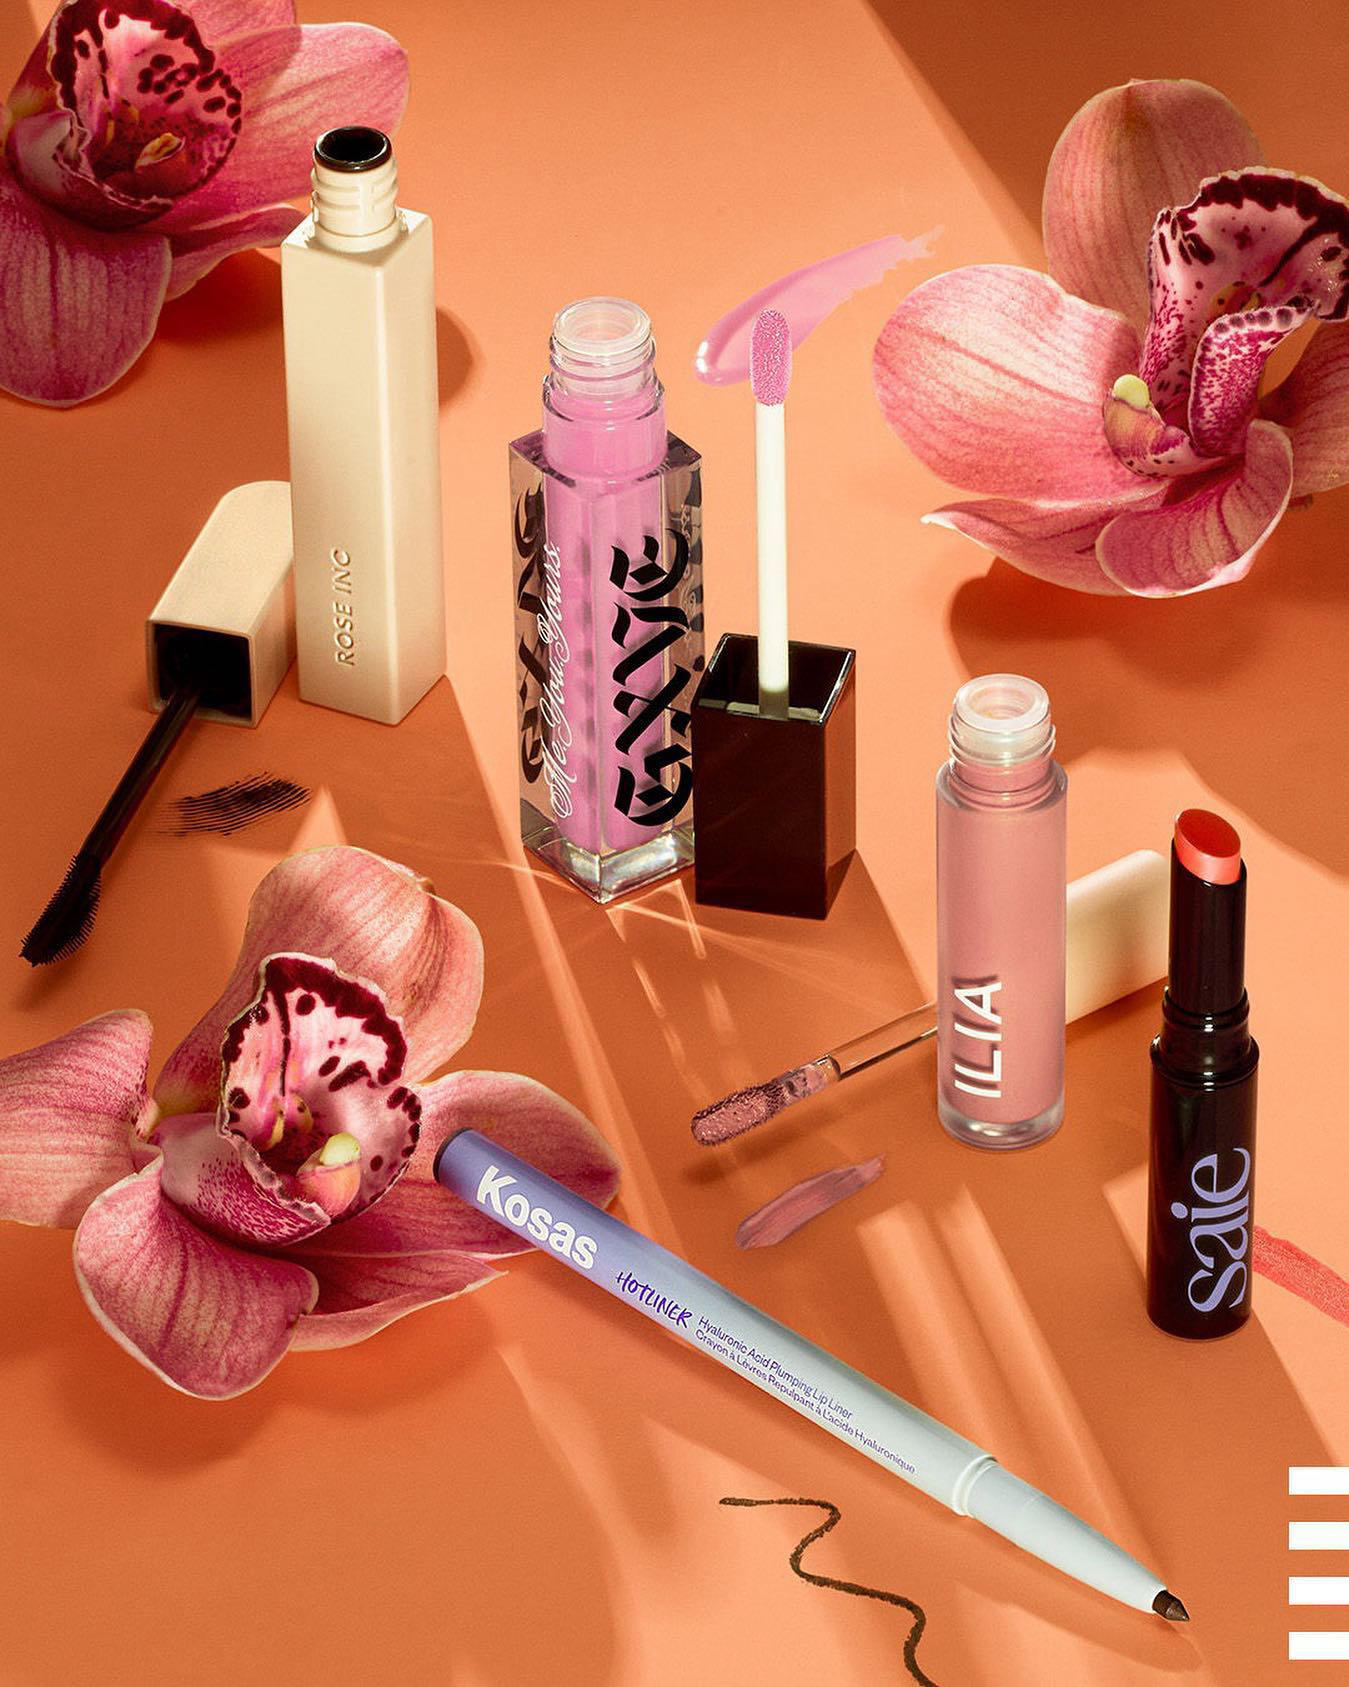 Sephora - New clean makeup to go with your golden-hour playlist